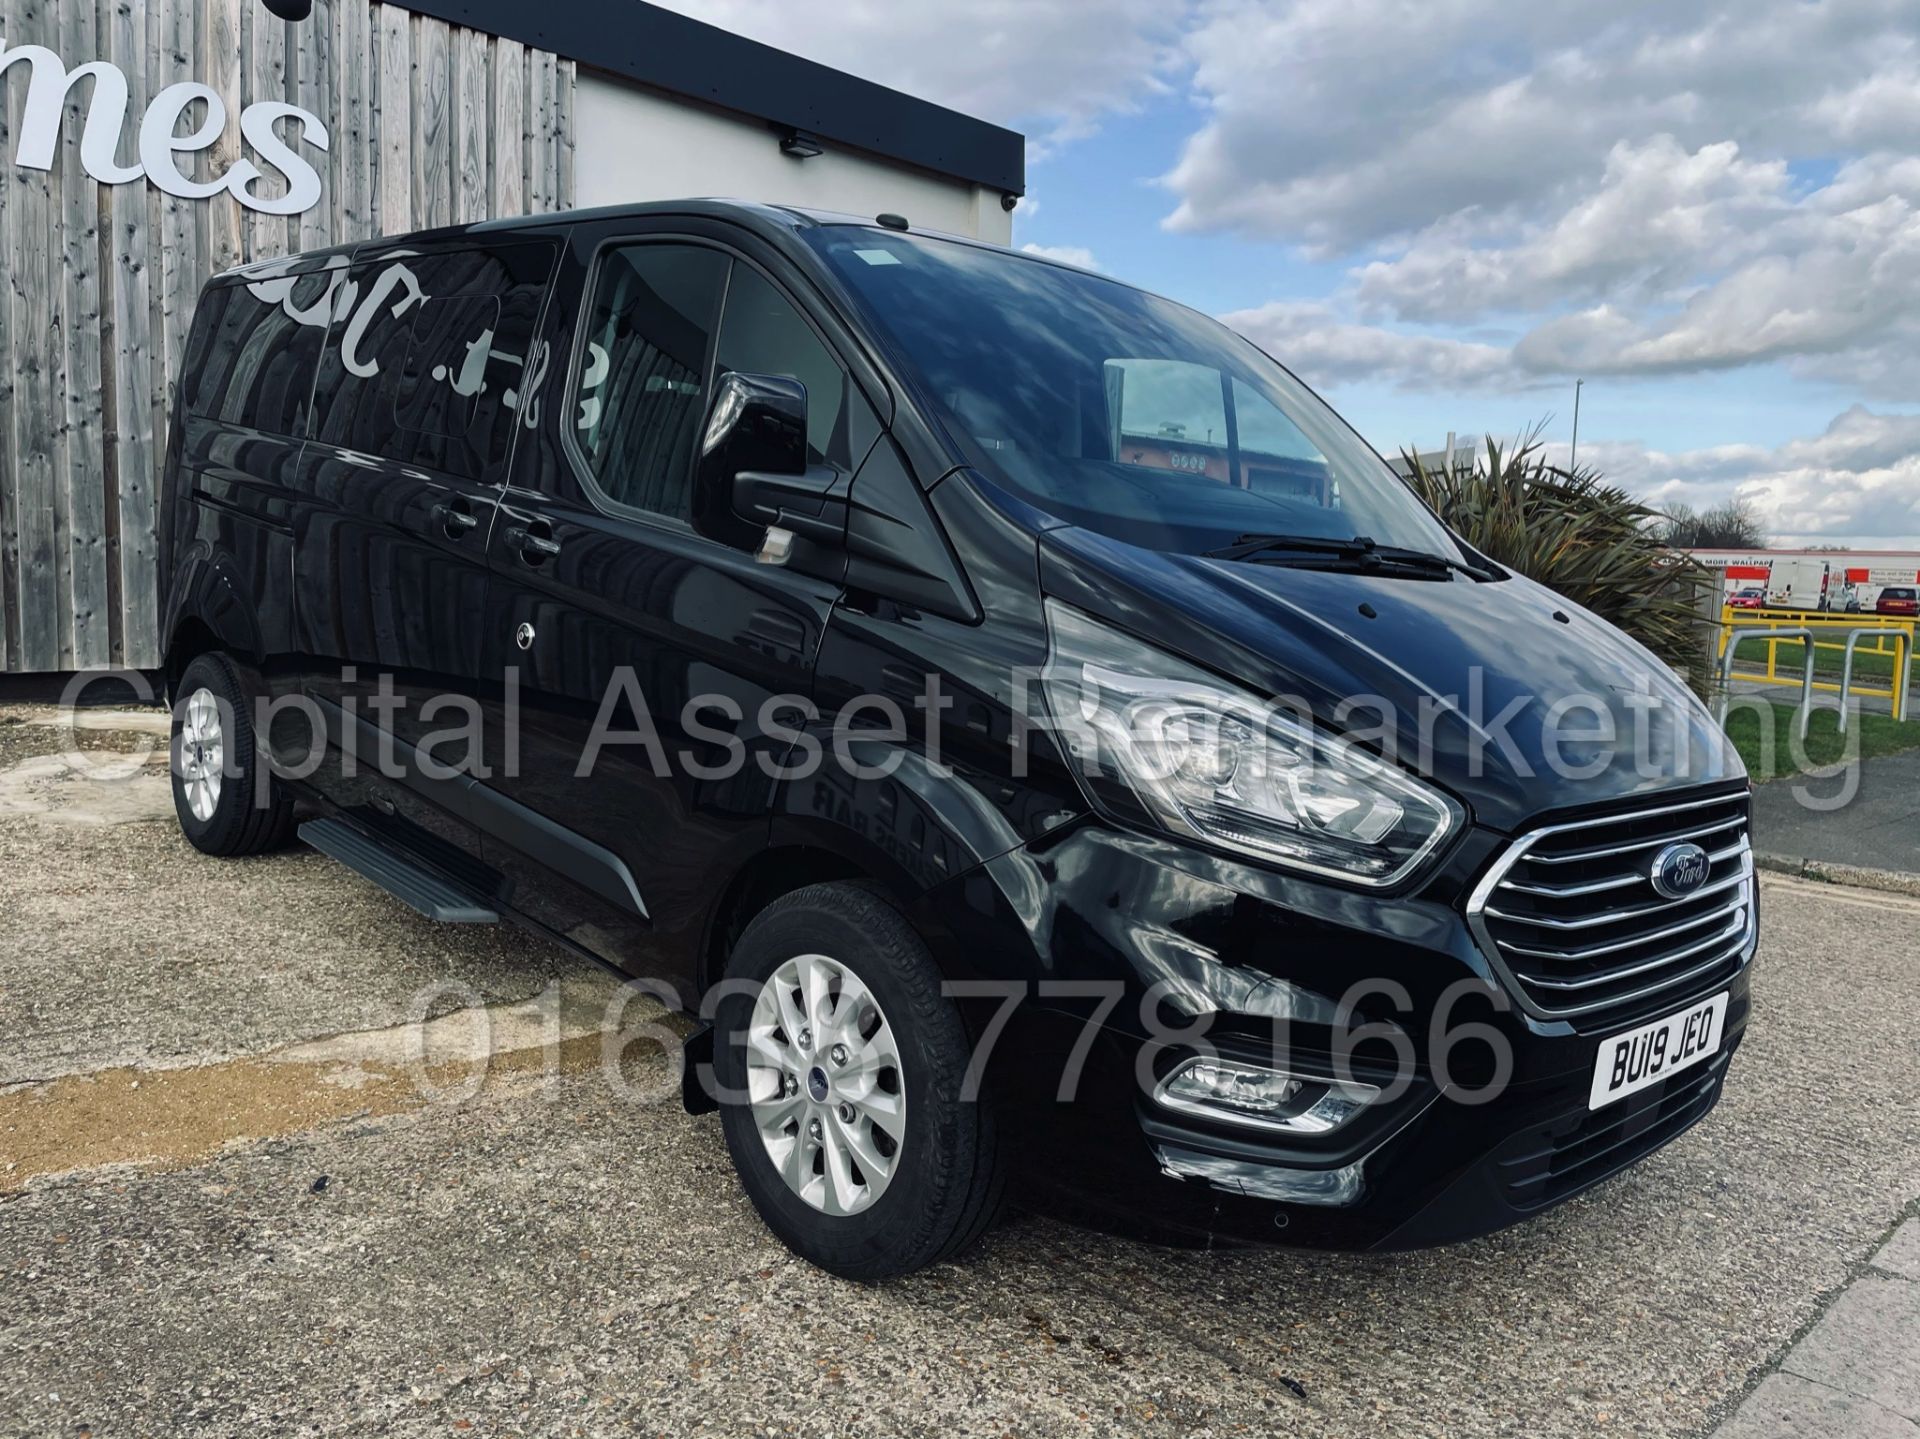 (On Sale) FORD TRANSIT CUSTOM TOURNEO *9 SEATER MPV / BUS* (2019) '2.0 TDCI - 130 BHP' (1 OWNER) - Image 12 of 46